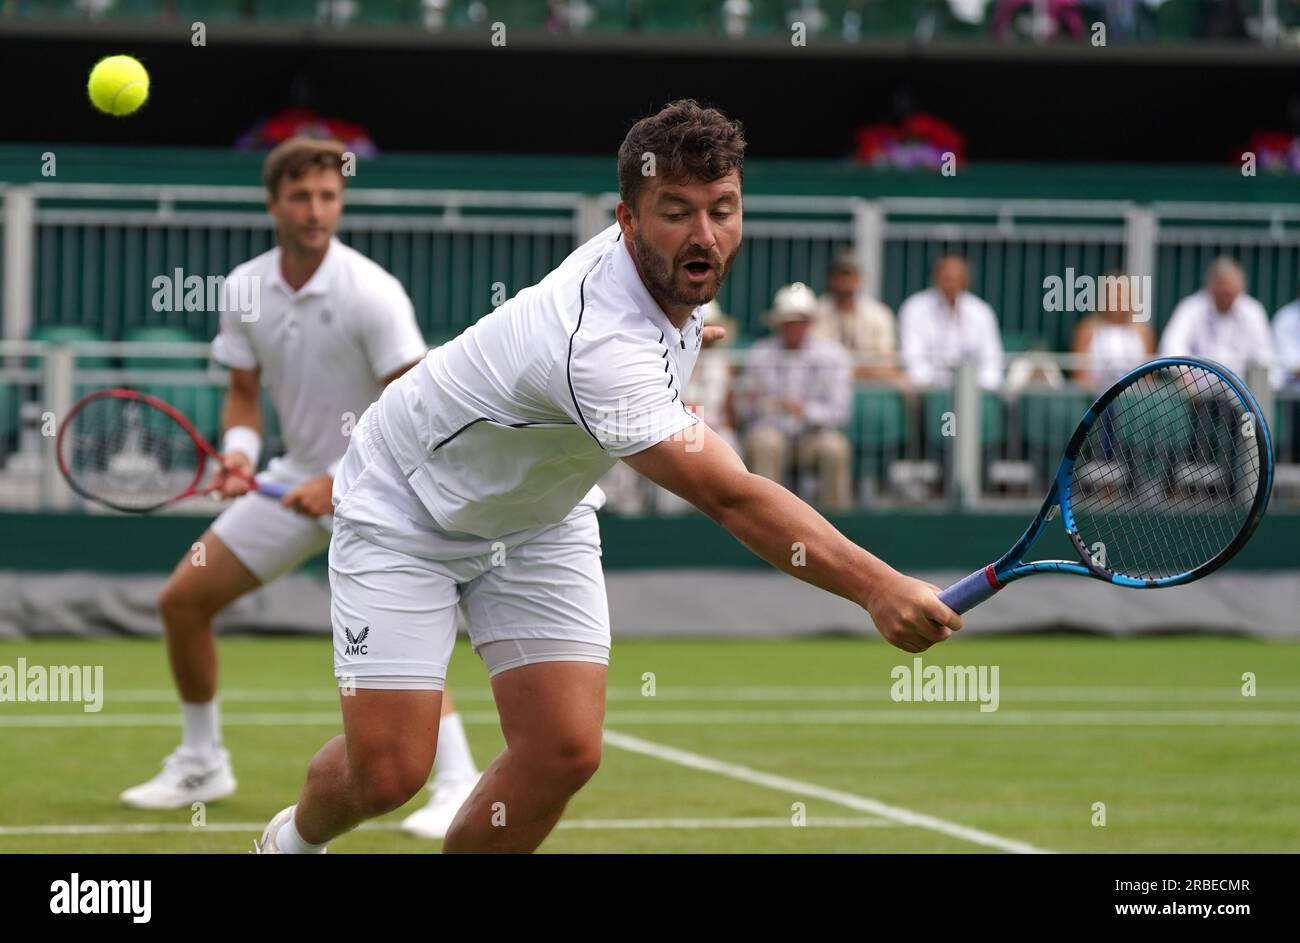 Jonny O'Mara (right) and Liam Broady (left) during their match against Rafael Matos and Francisco Cabral (not pictured) on day seven of the 2023 Wimbledon Championships at the All England Lawn Tennis and Croquet Club in Wimbledon. Picture date: Sunday July 9, 2023. Stock Photo